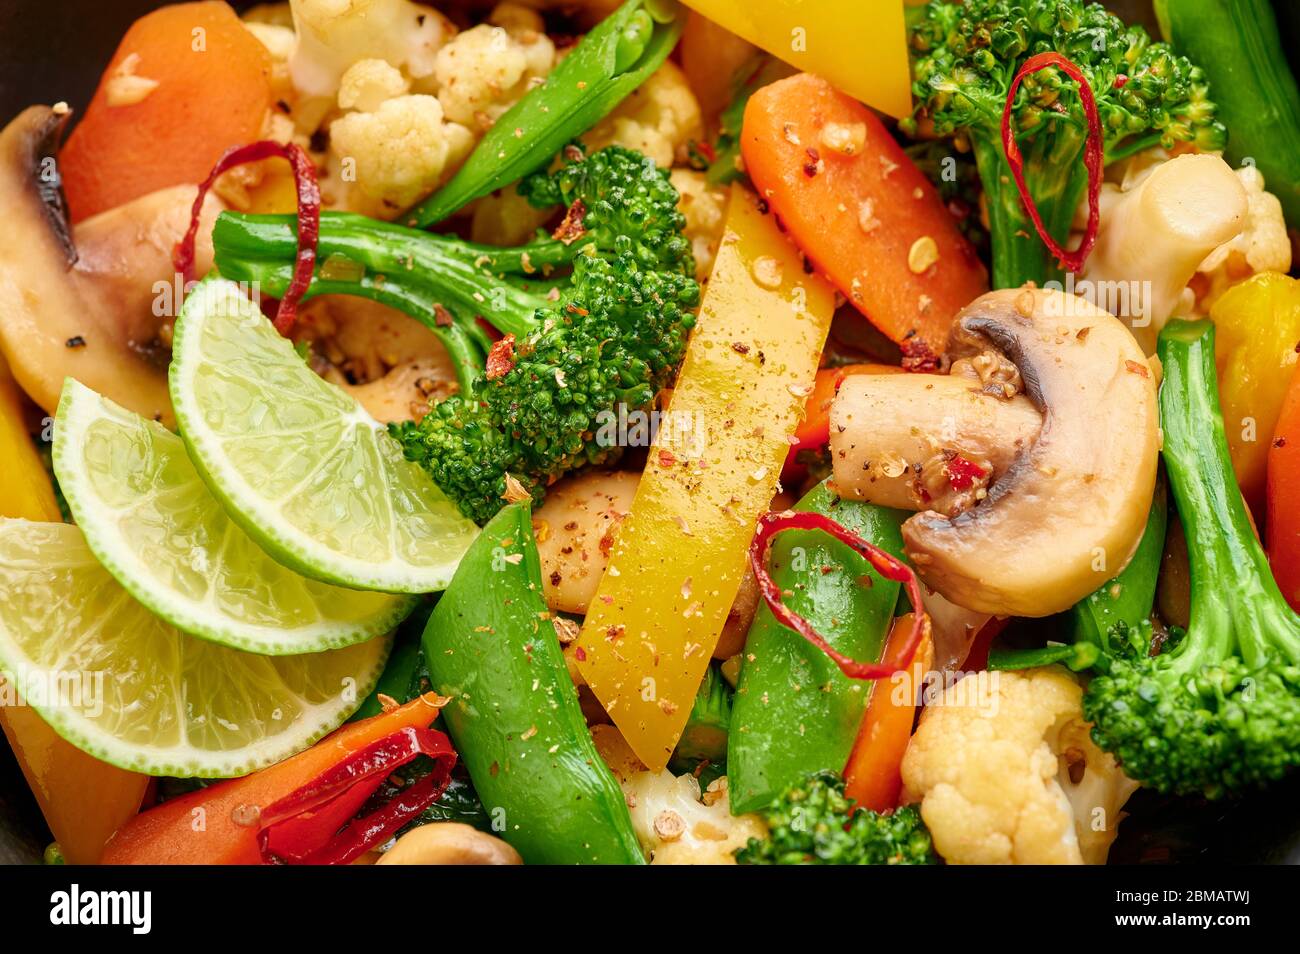 Pad Pak Ruam or Veg Thai Stir-Fried Vegetables close up texture. Pad Pak is  thailand cuisine vegetarian dish with mix of vegetables and sauces. Thai F  Stock Photo - Alamy